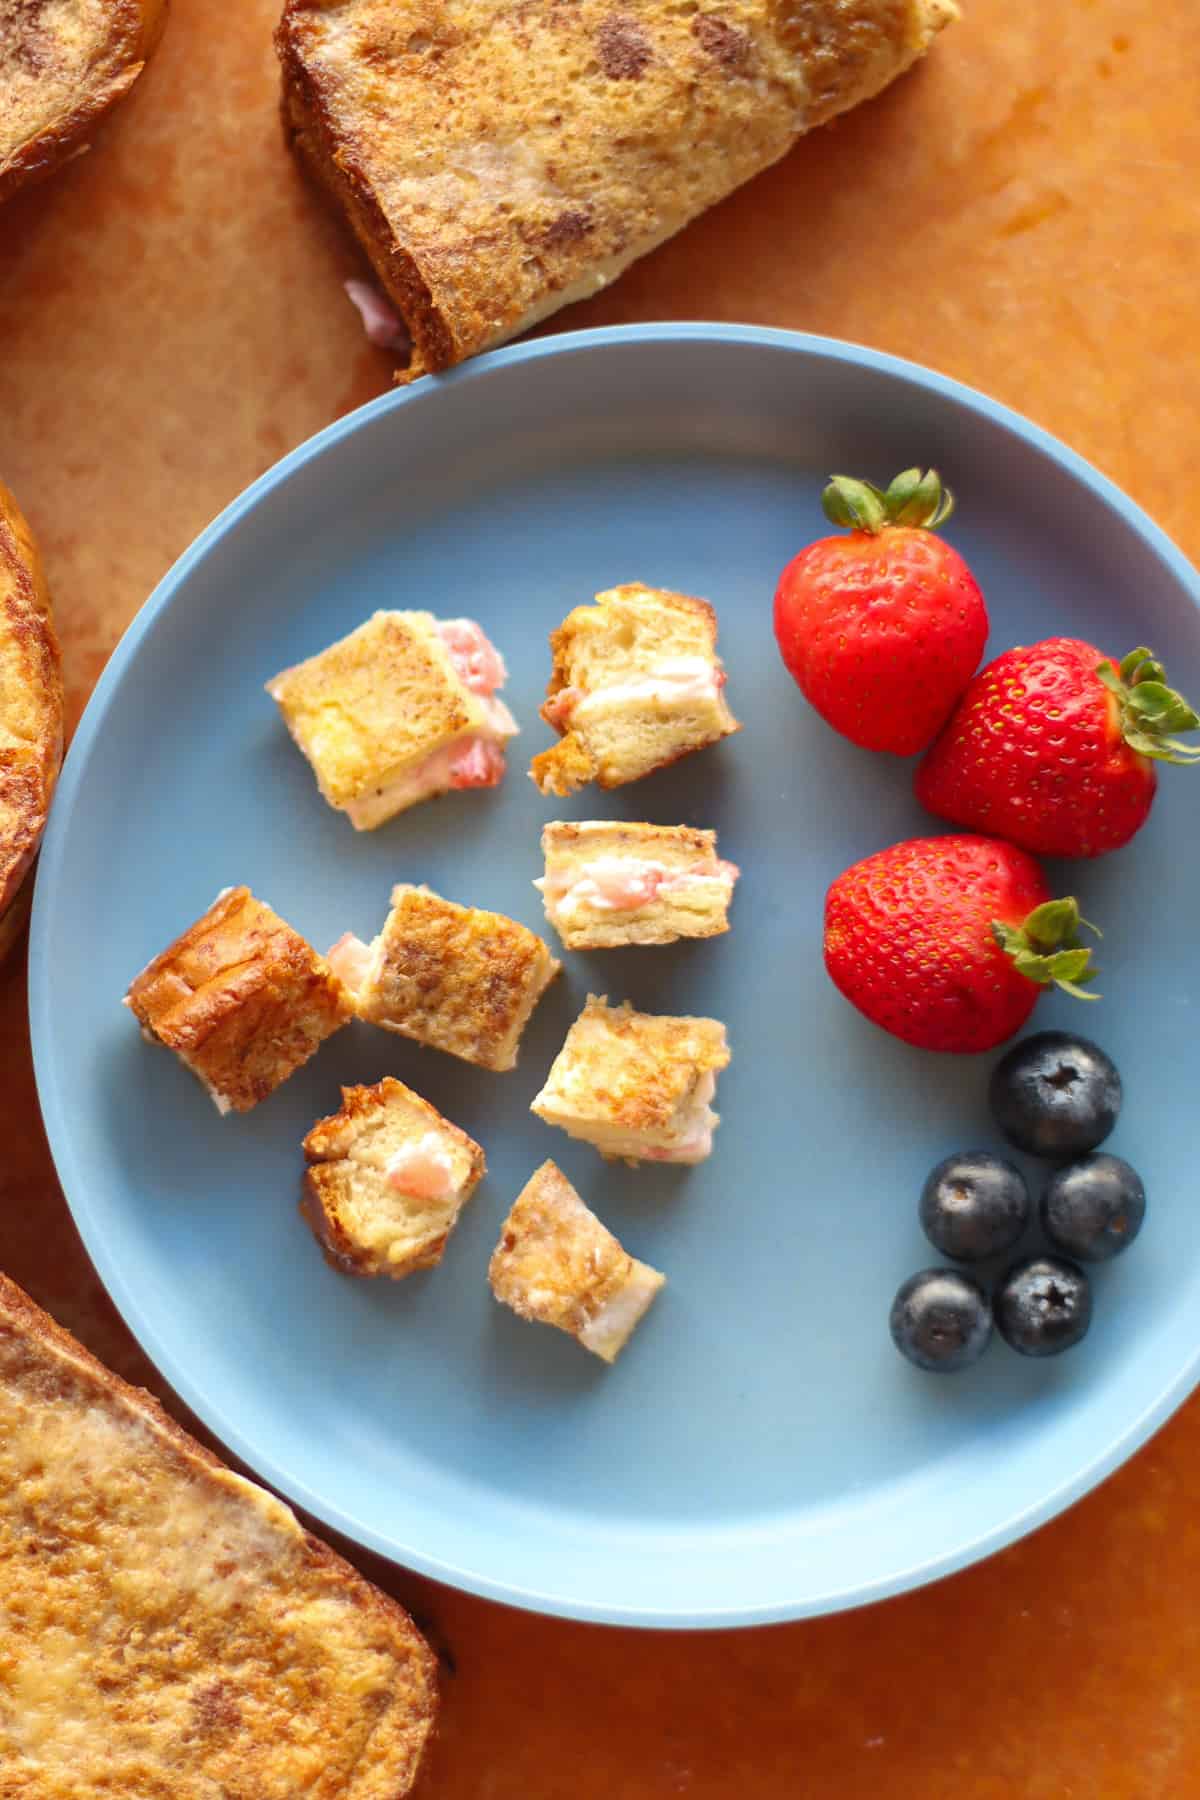 Stuffed French toast cut into bite-sized pieces with strawberries and blueberries on the side.